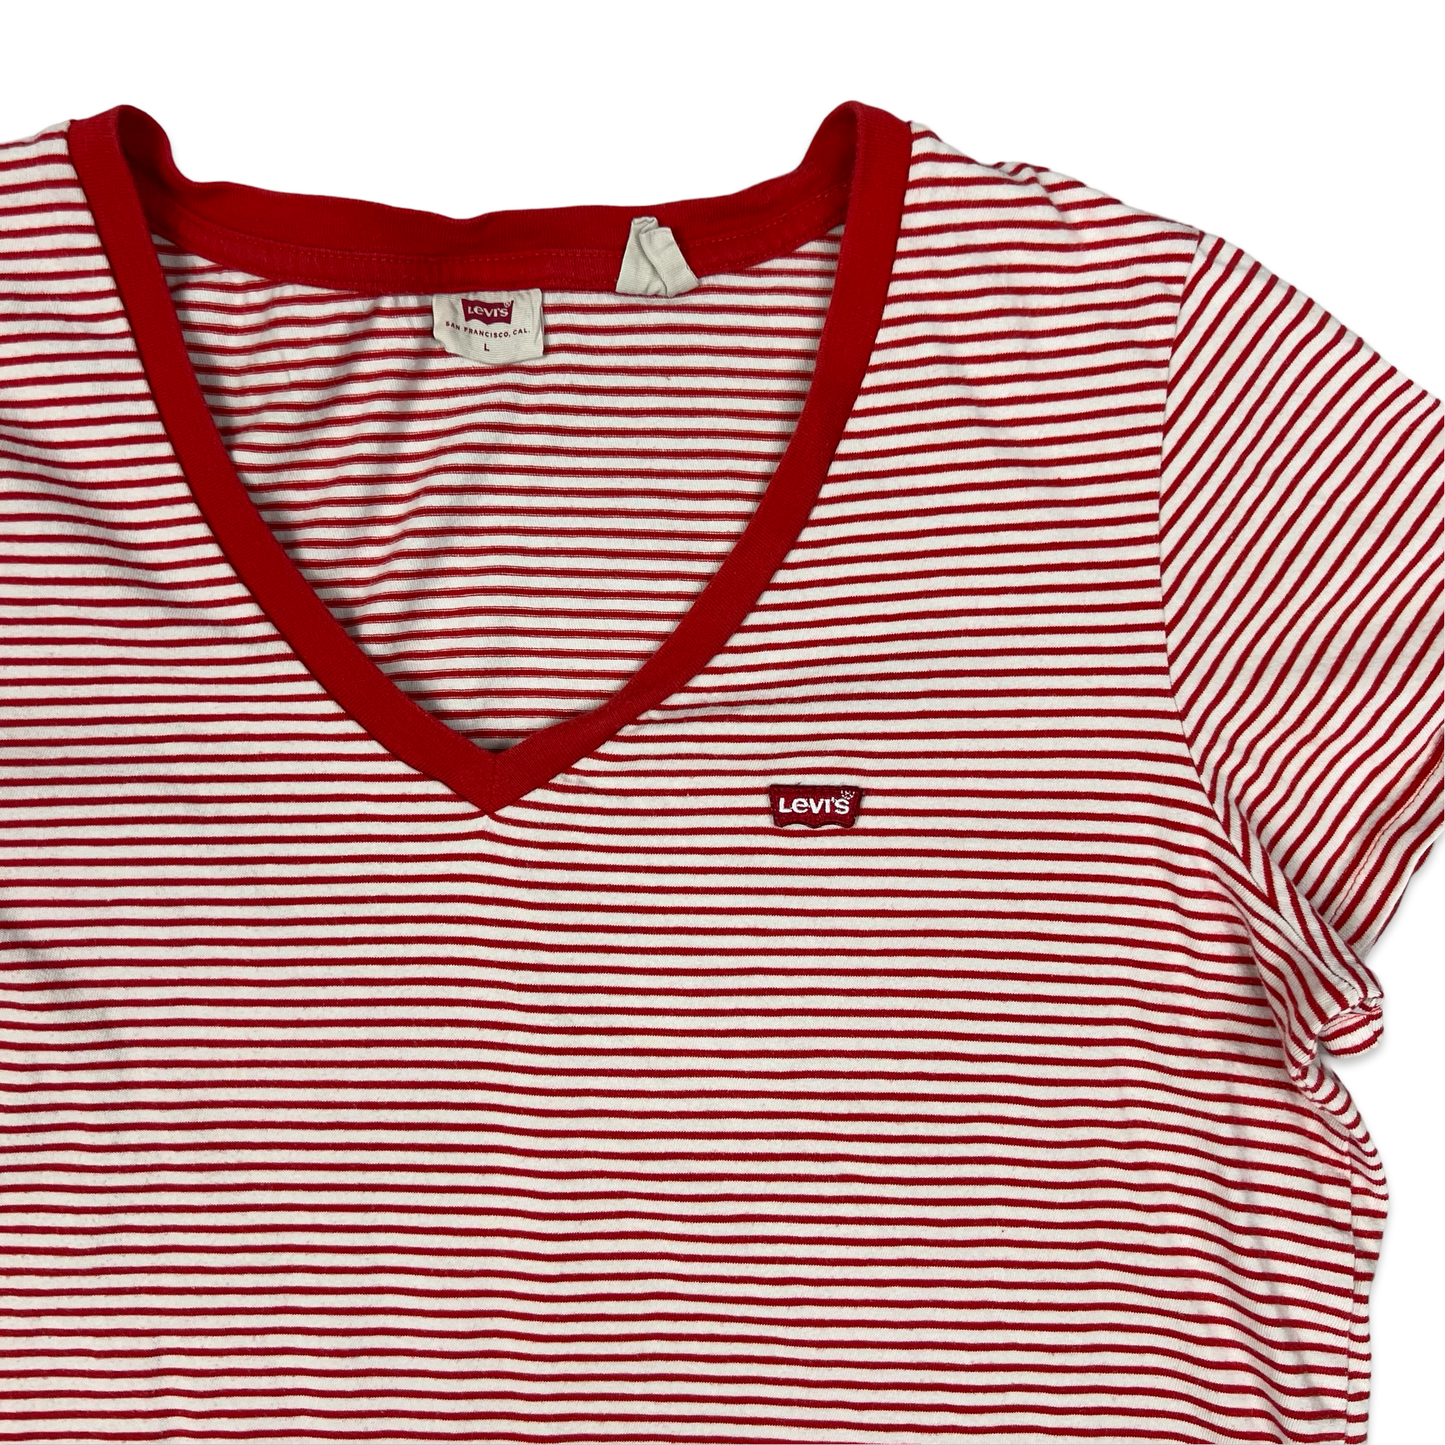 Levi's Red & White Striped Top 16